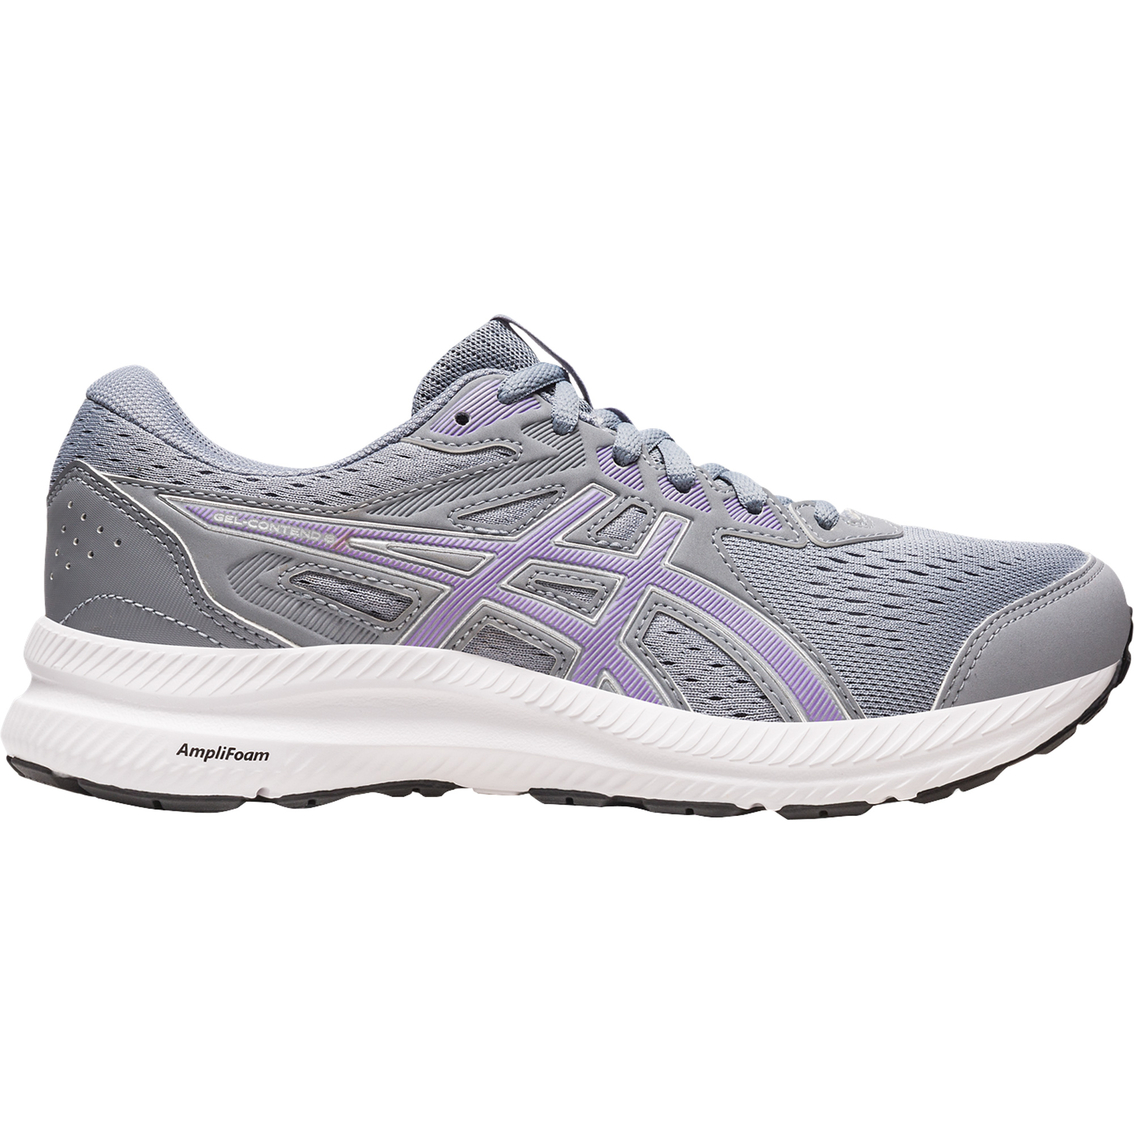 ASICS Women's GEL-Contend 8 Running Shoes - Image 2 of 7